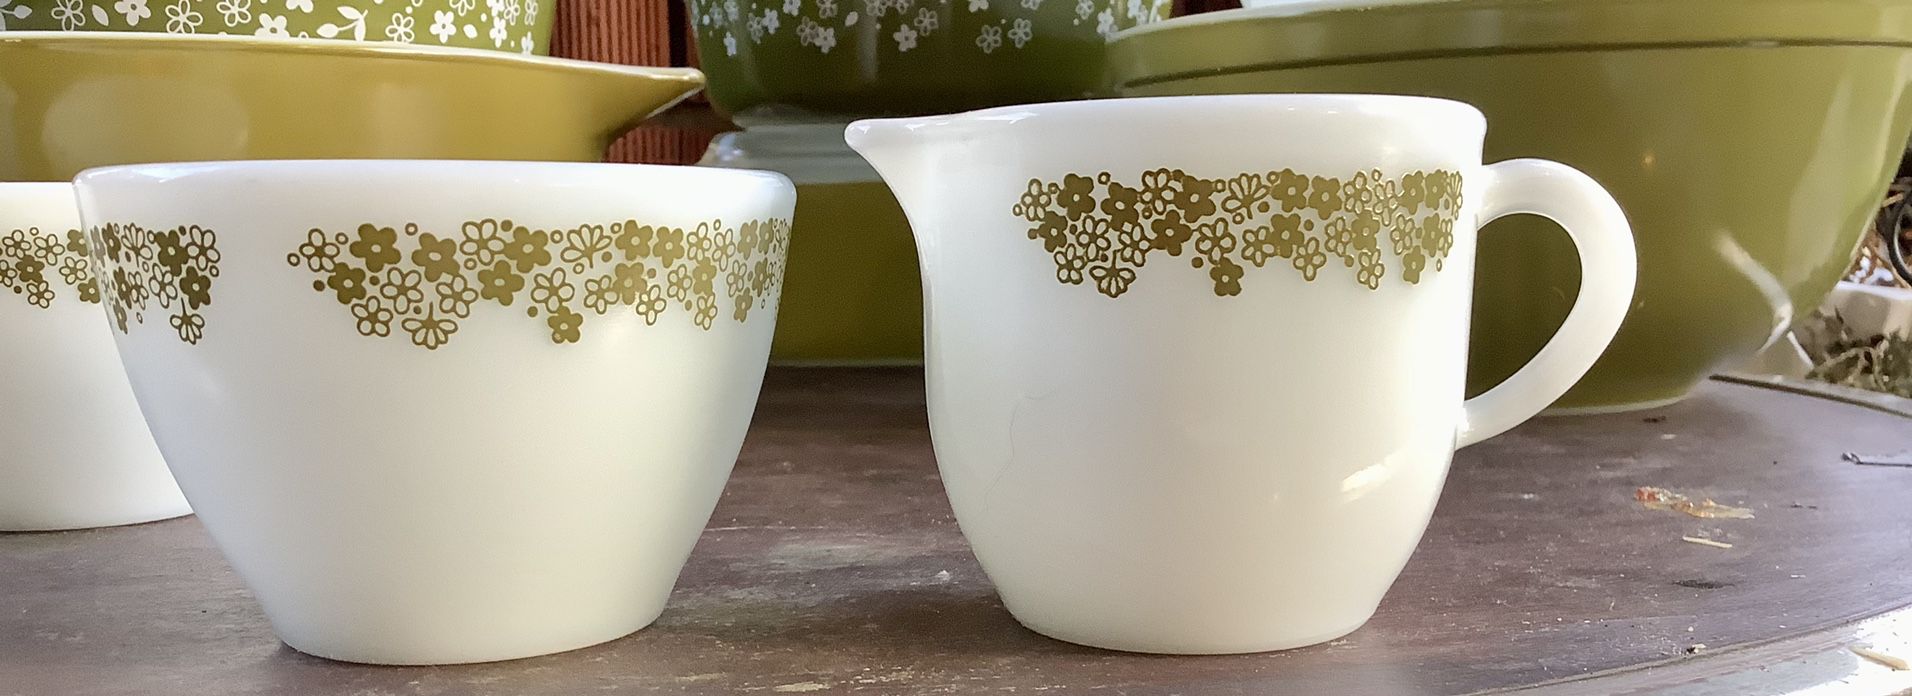 Spring Blossom Pyrex Various Prices All With Buyer Paying Shipping And PayPal Invoice